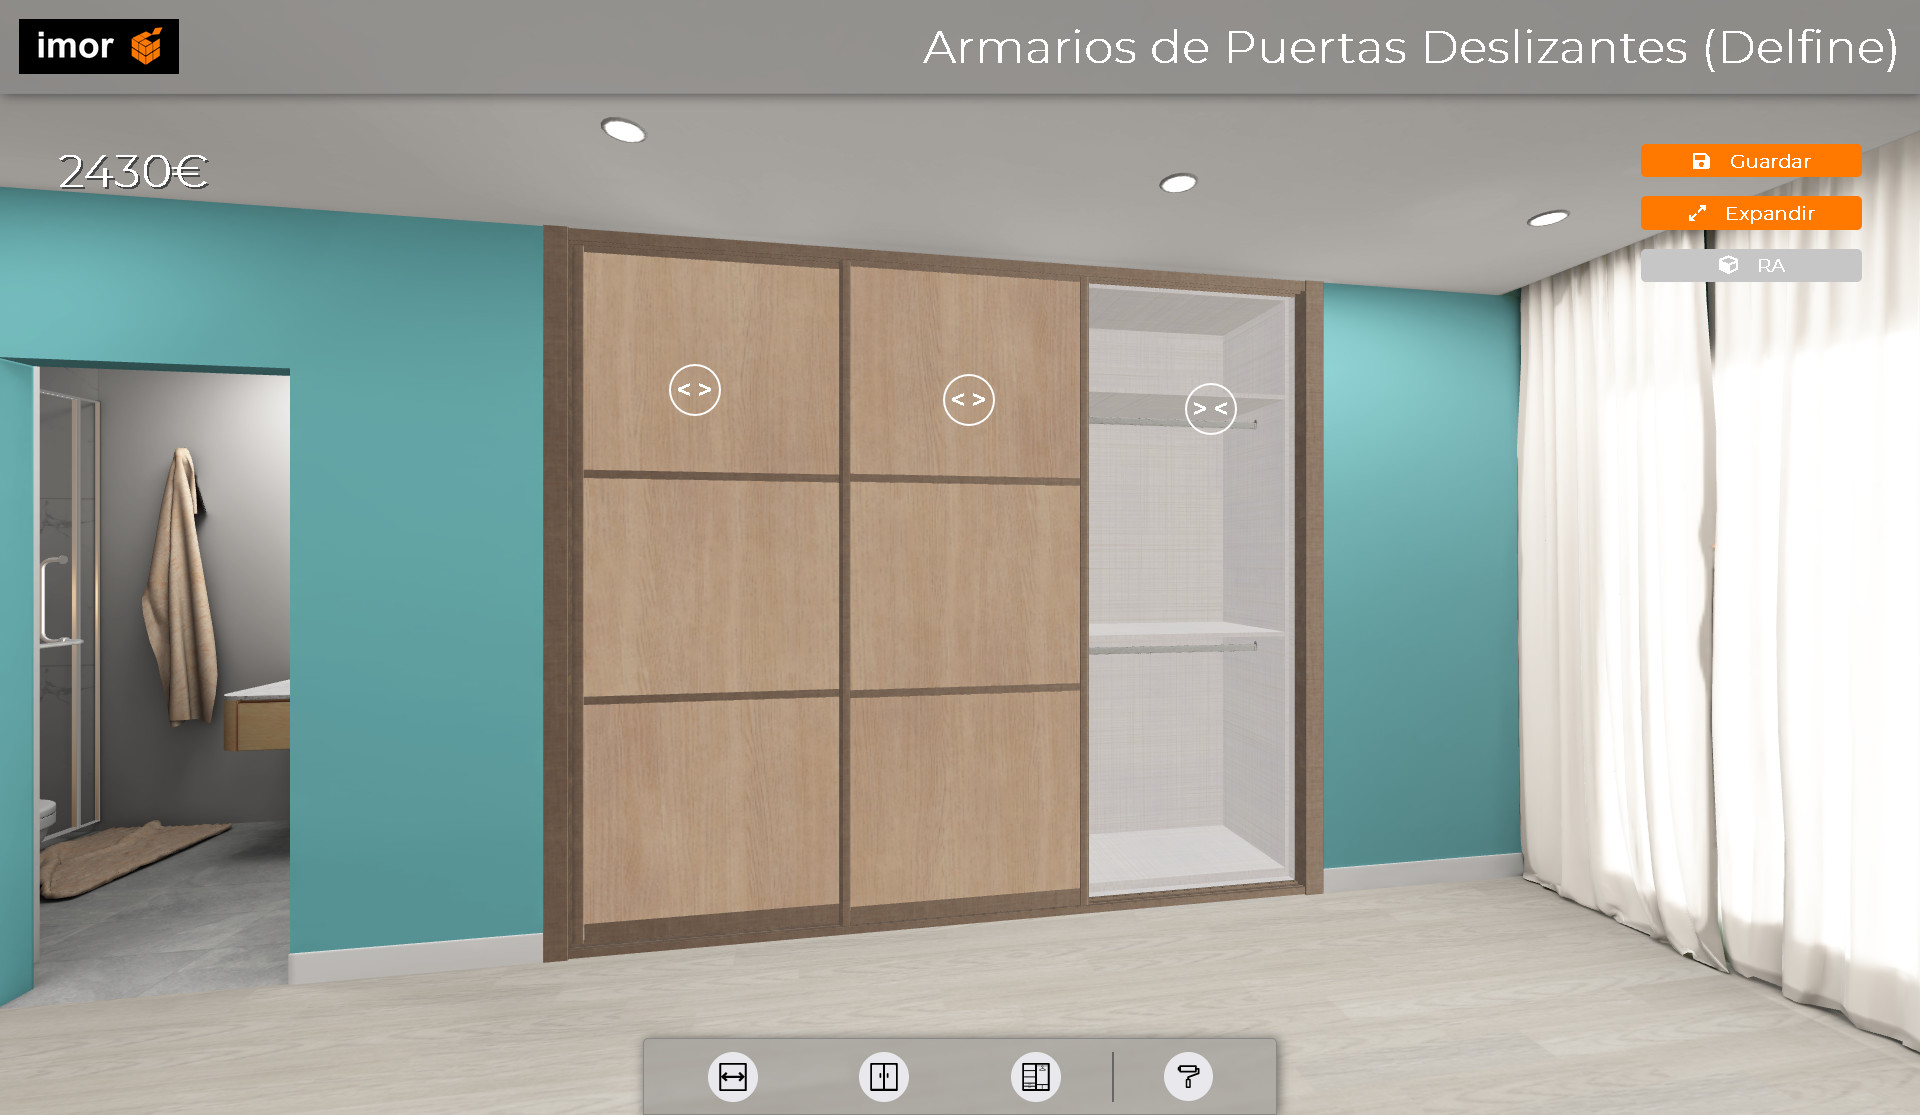 Wardrobe configuration from 3D tool on web